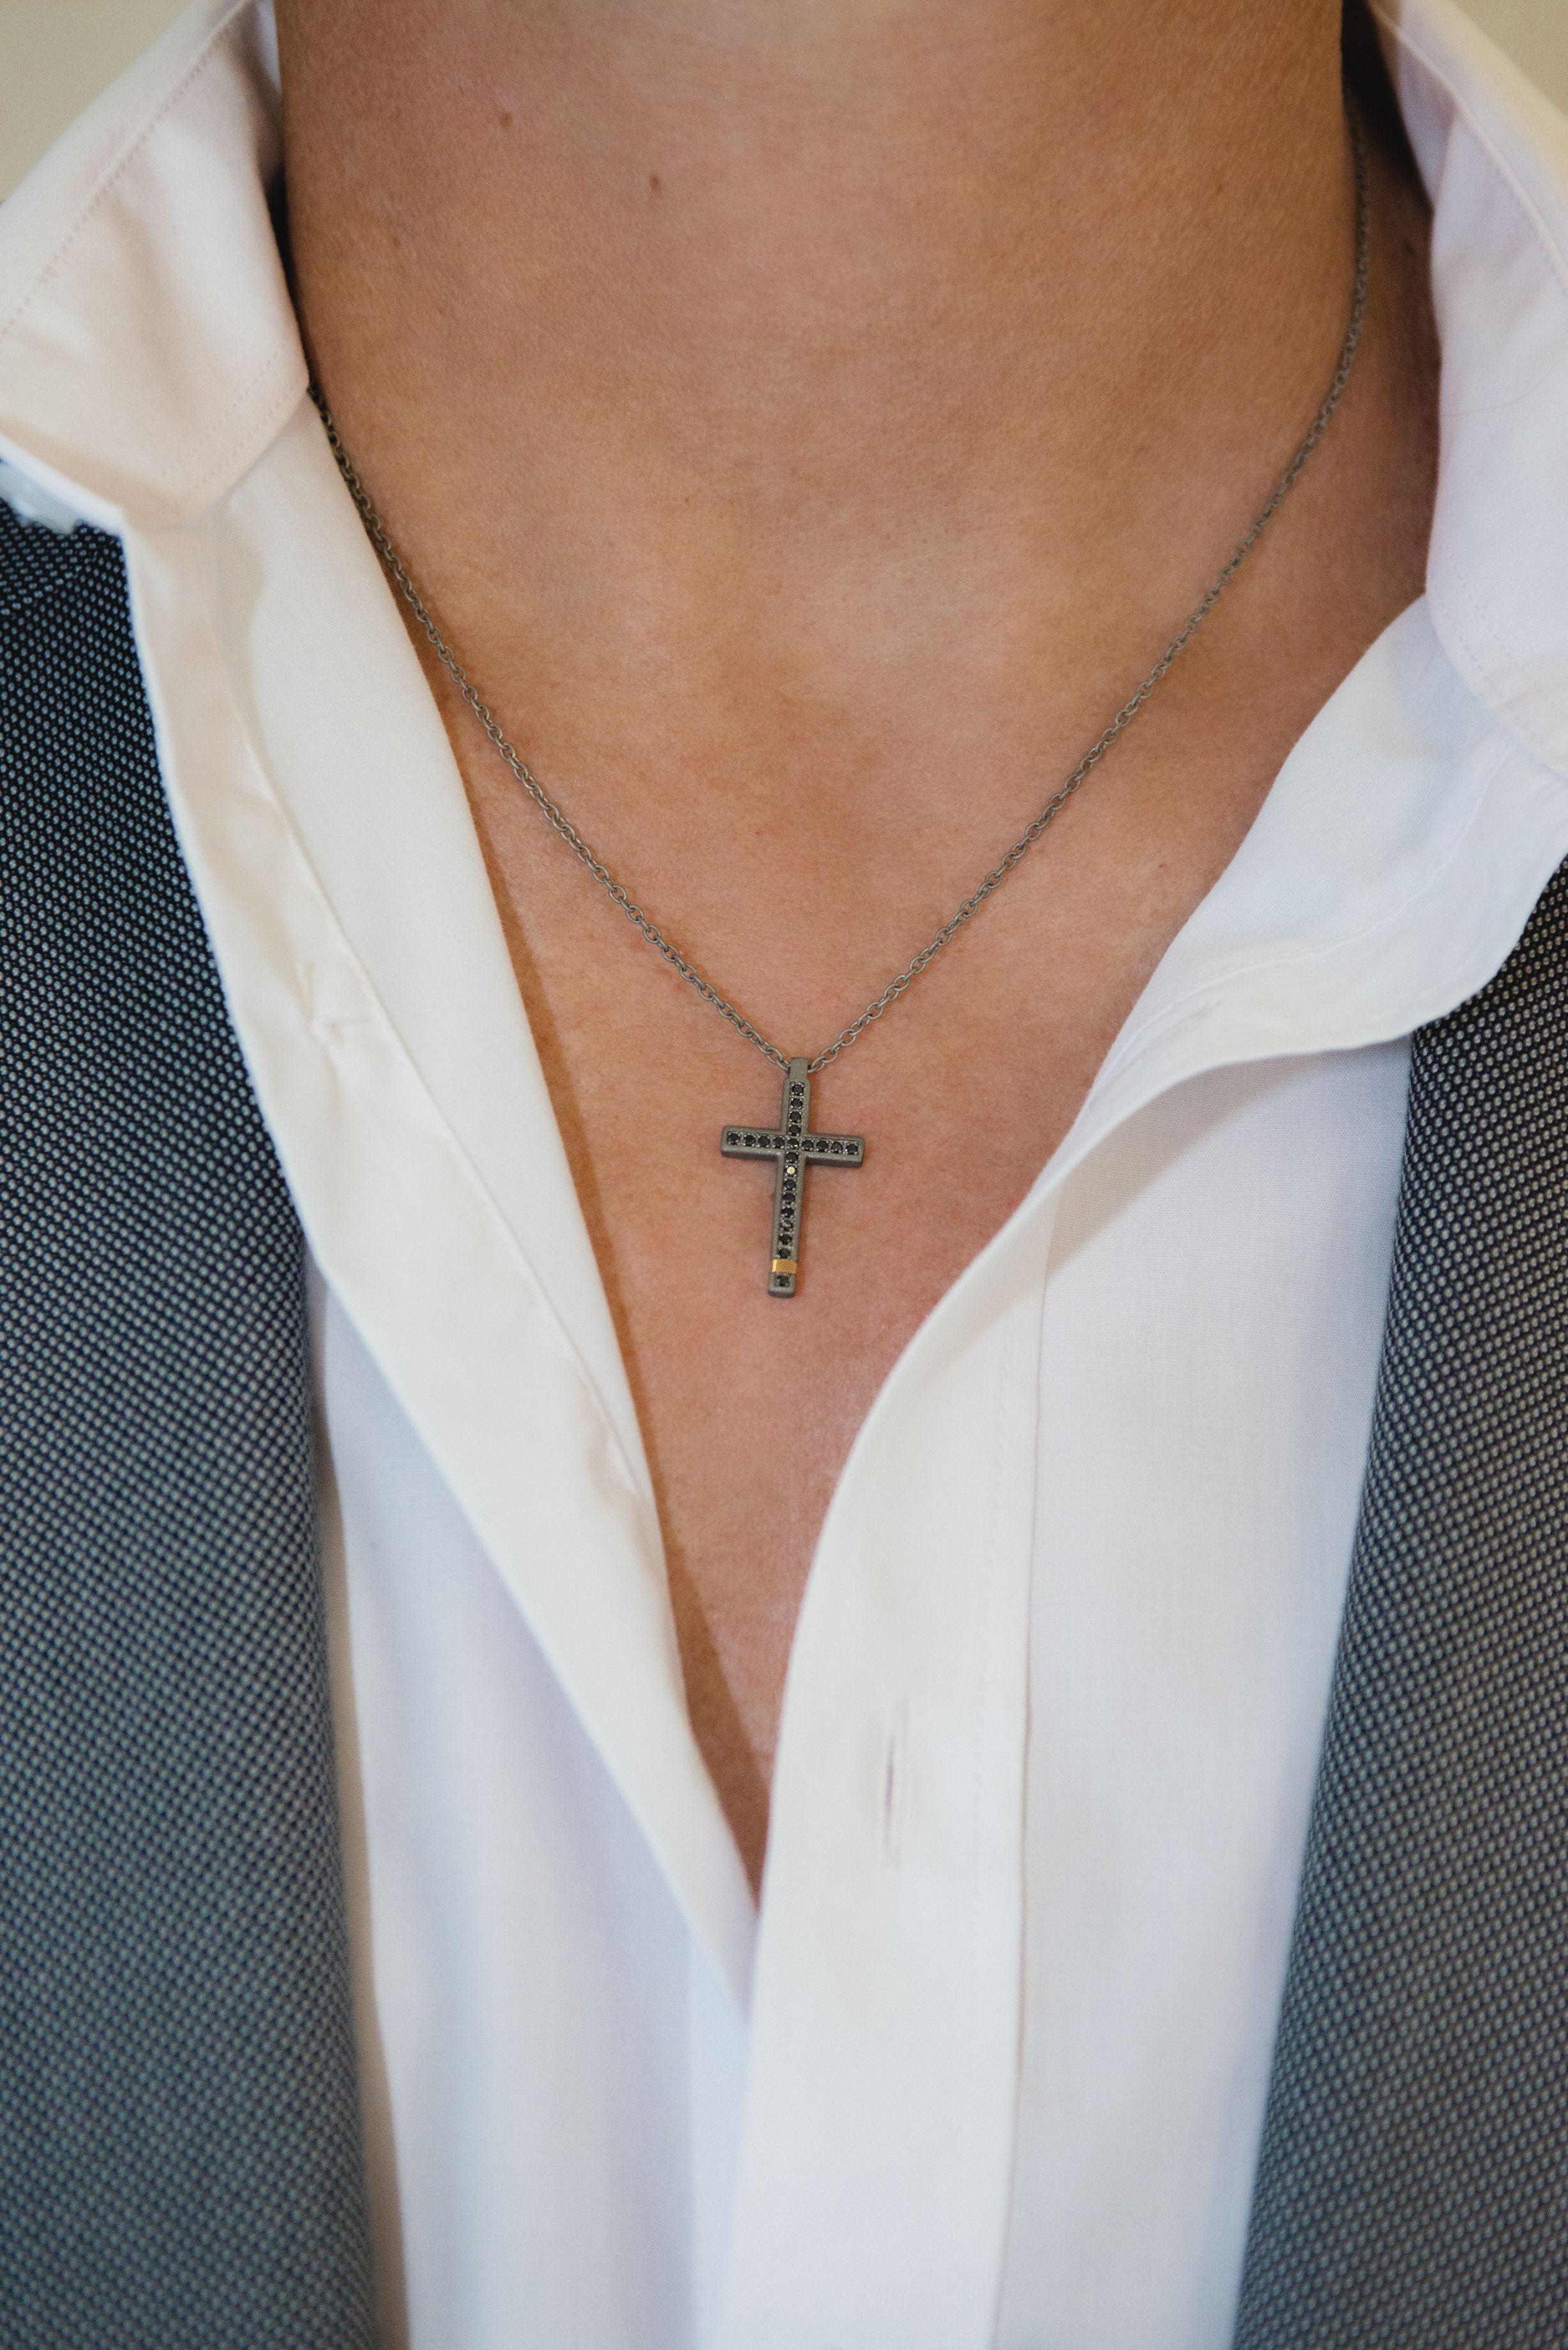 Montana Silversmiths Silver and Black Cross Necklace